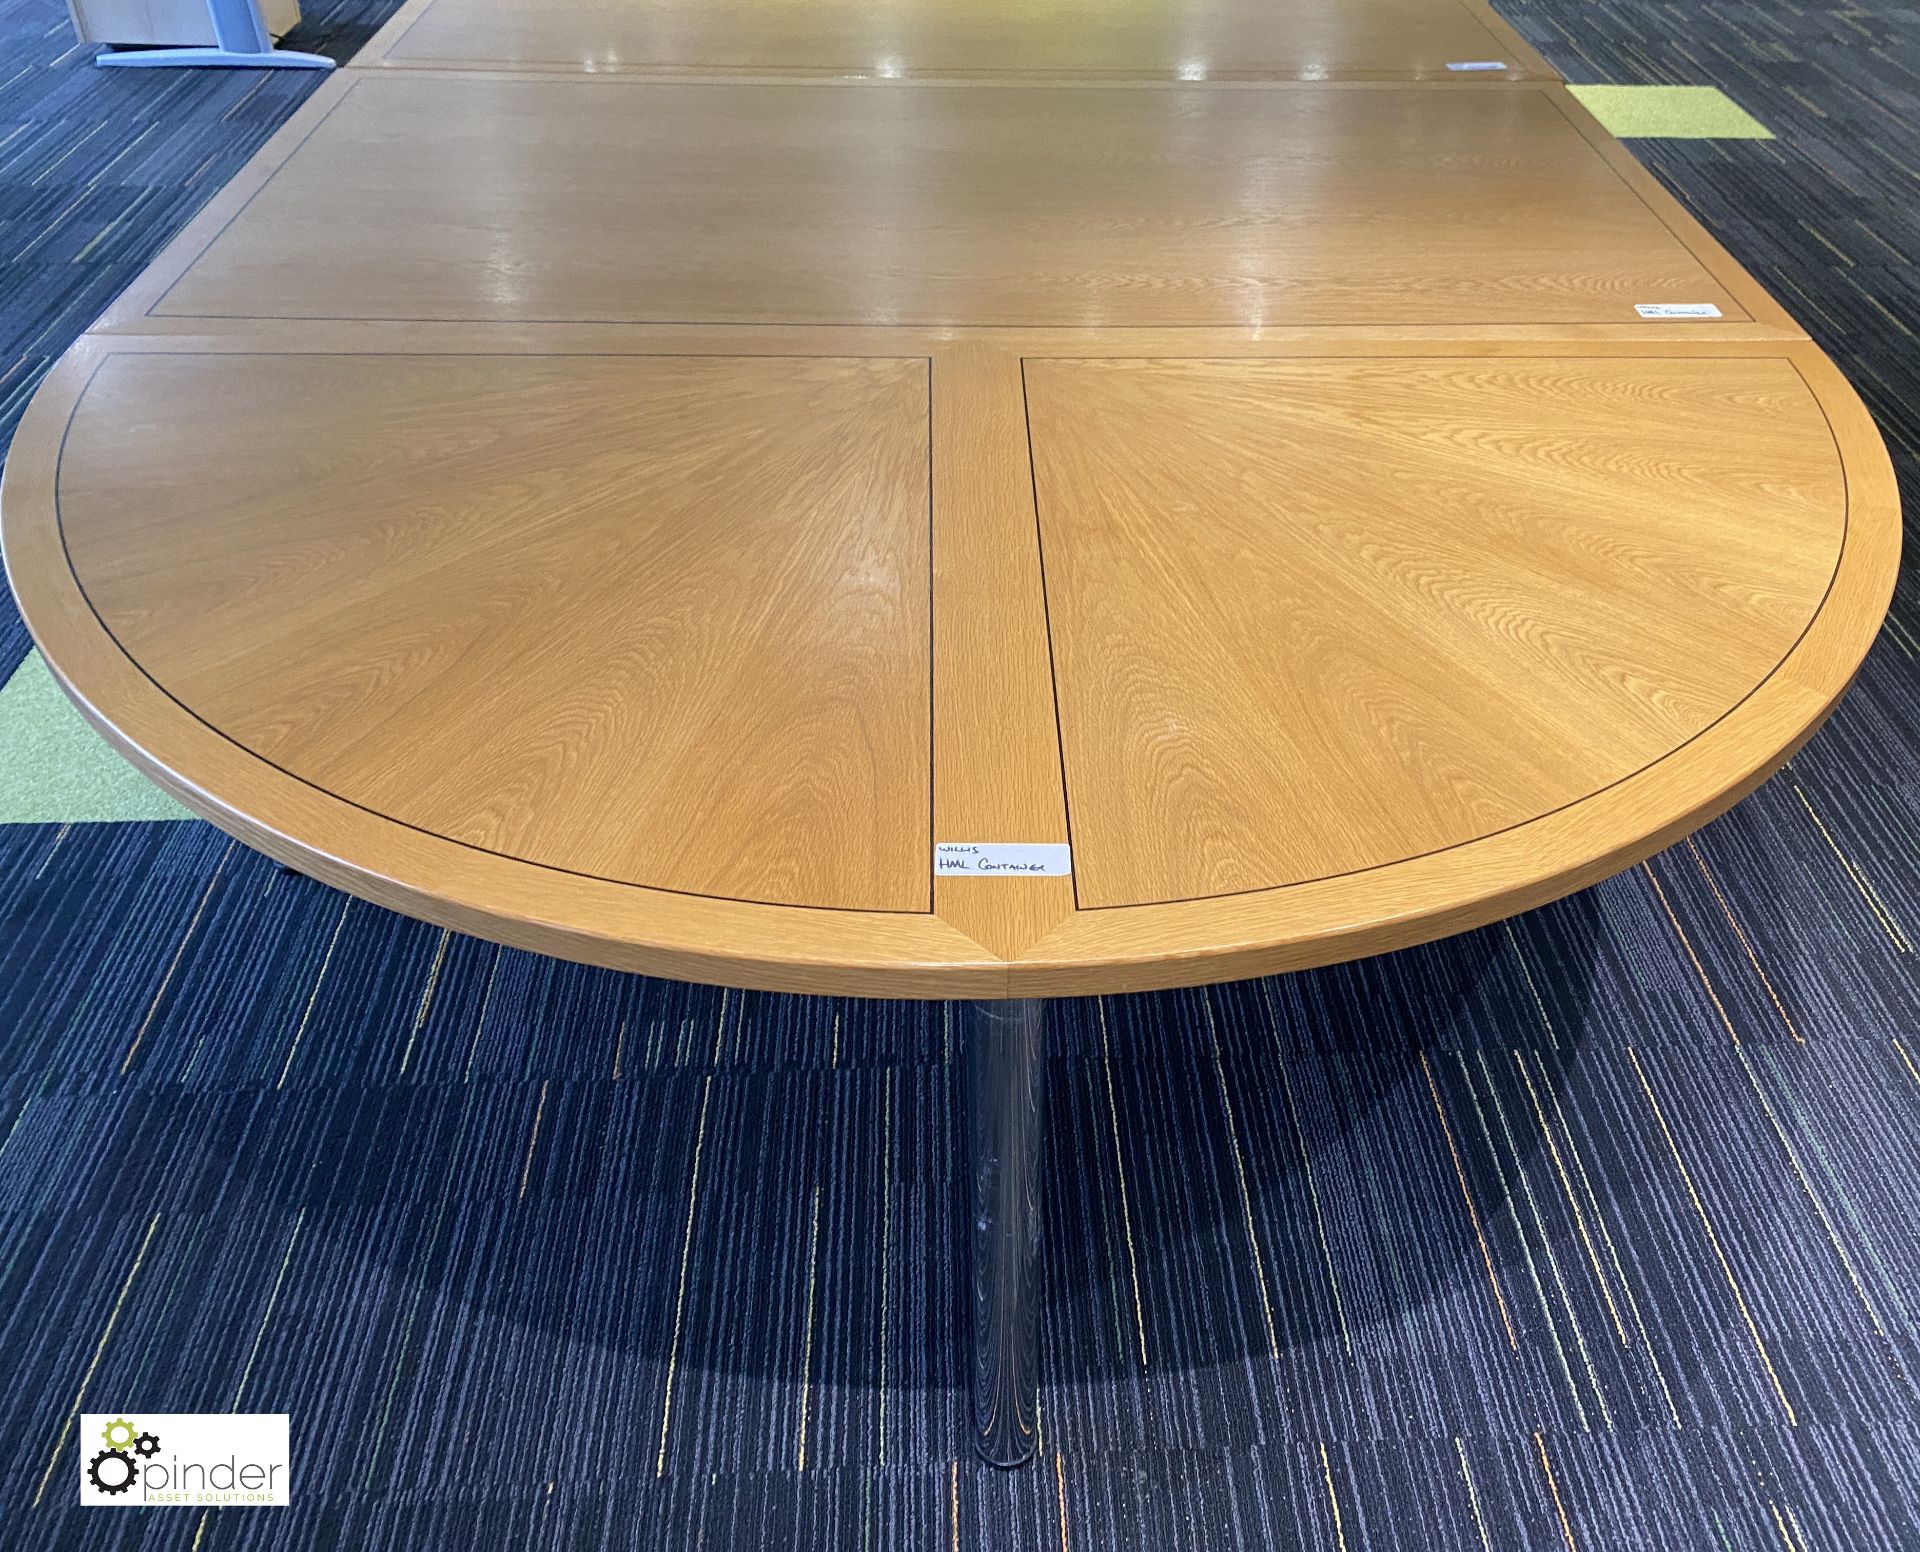 Light oak inlaid 4-section Boardroom Table, total overall dimension 4000mm x 2000mm - Image 6 of 8